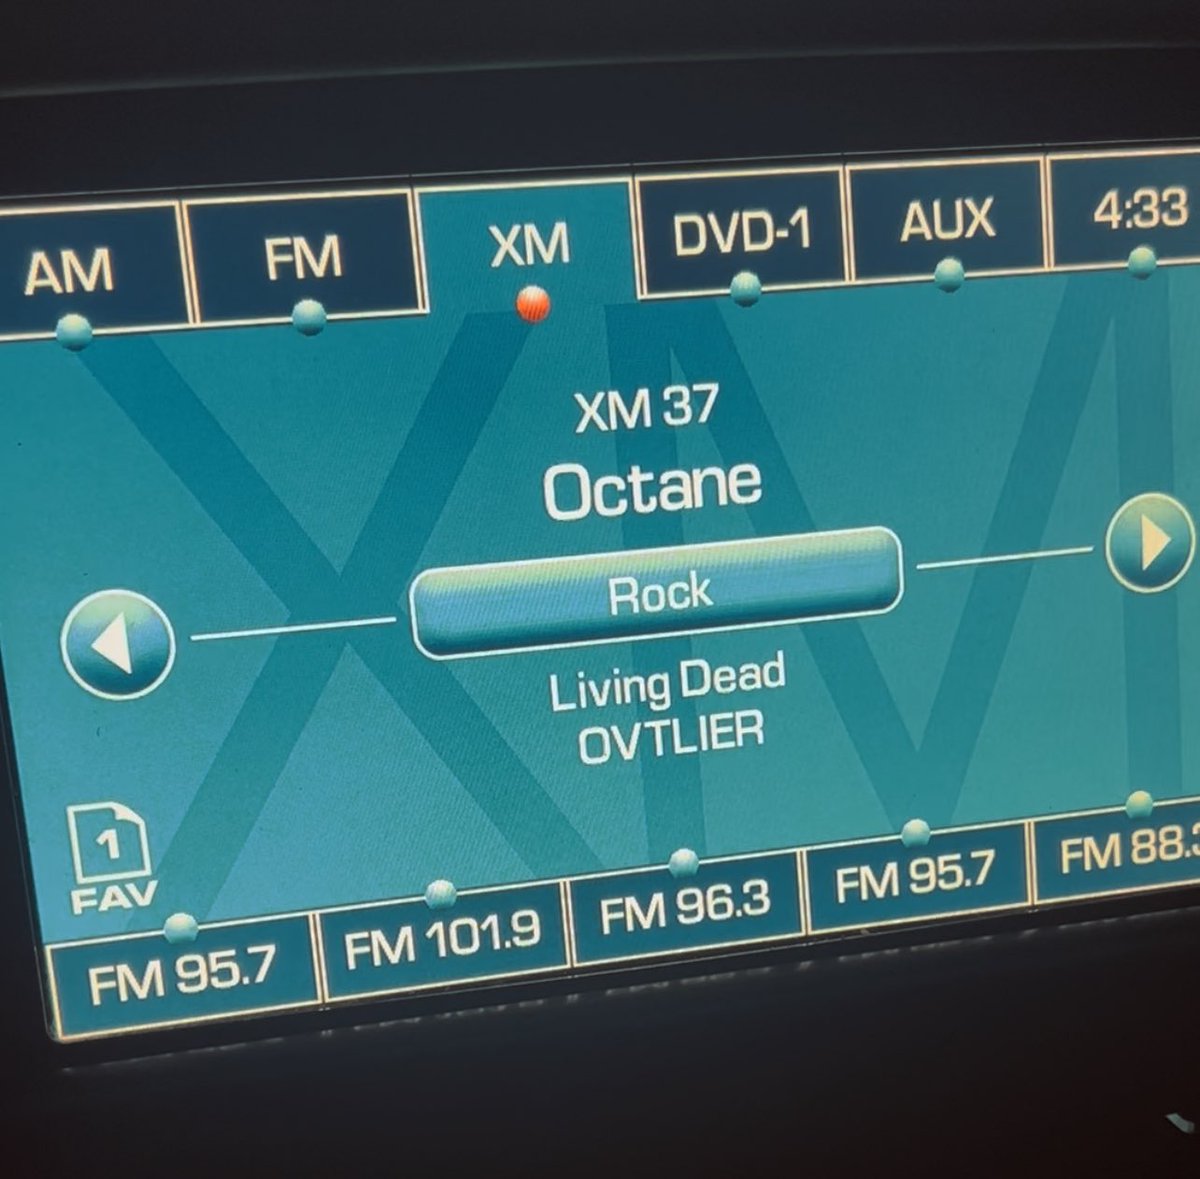 YEEESSSS! Caught it again!! Keep playing this MONSTER!! @josemangin @SXMOctane @ovtlierband #LivingDead #OctaneTestDrive